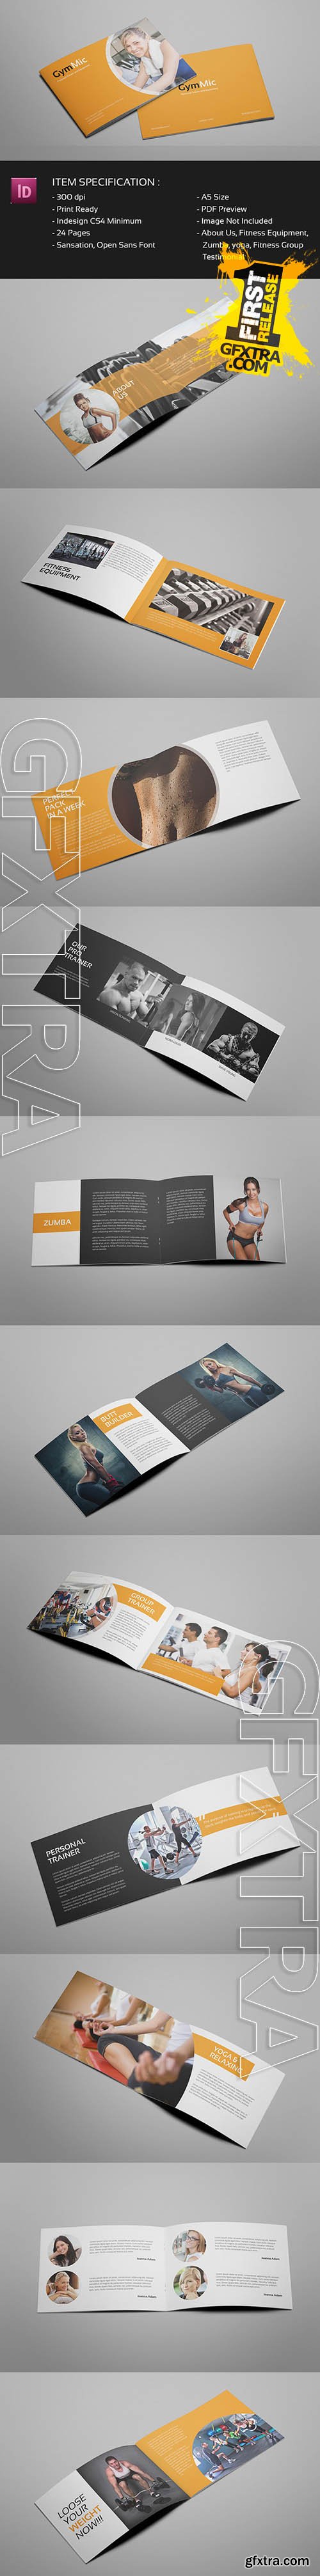 Gymmic - A5 Fitness and Gym Brochure - CM 237268